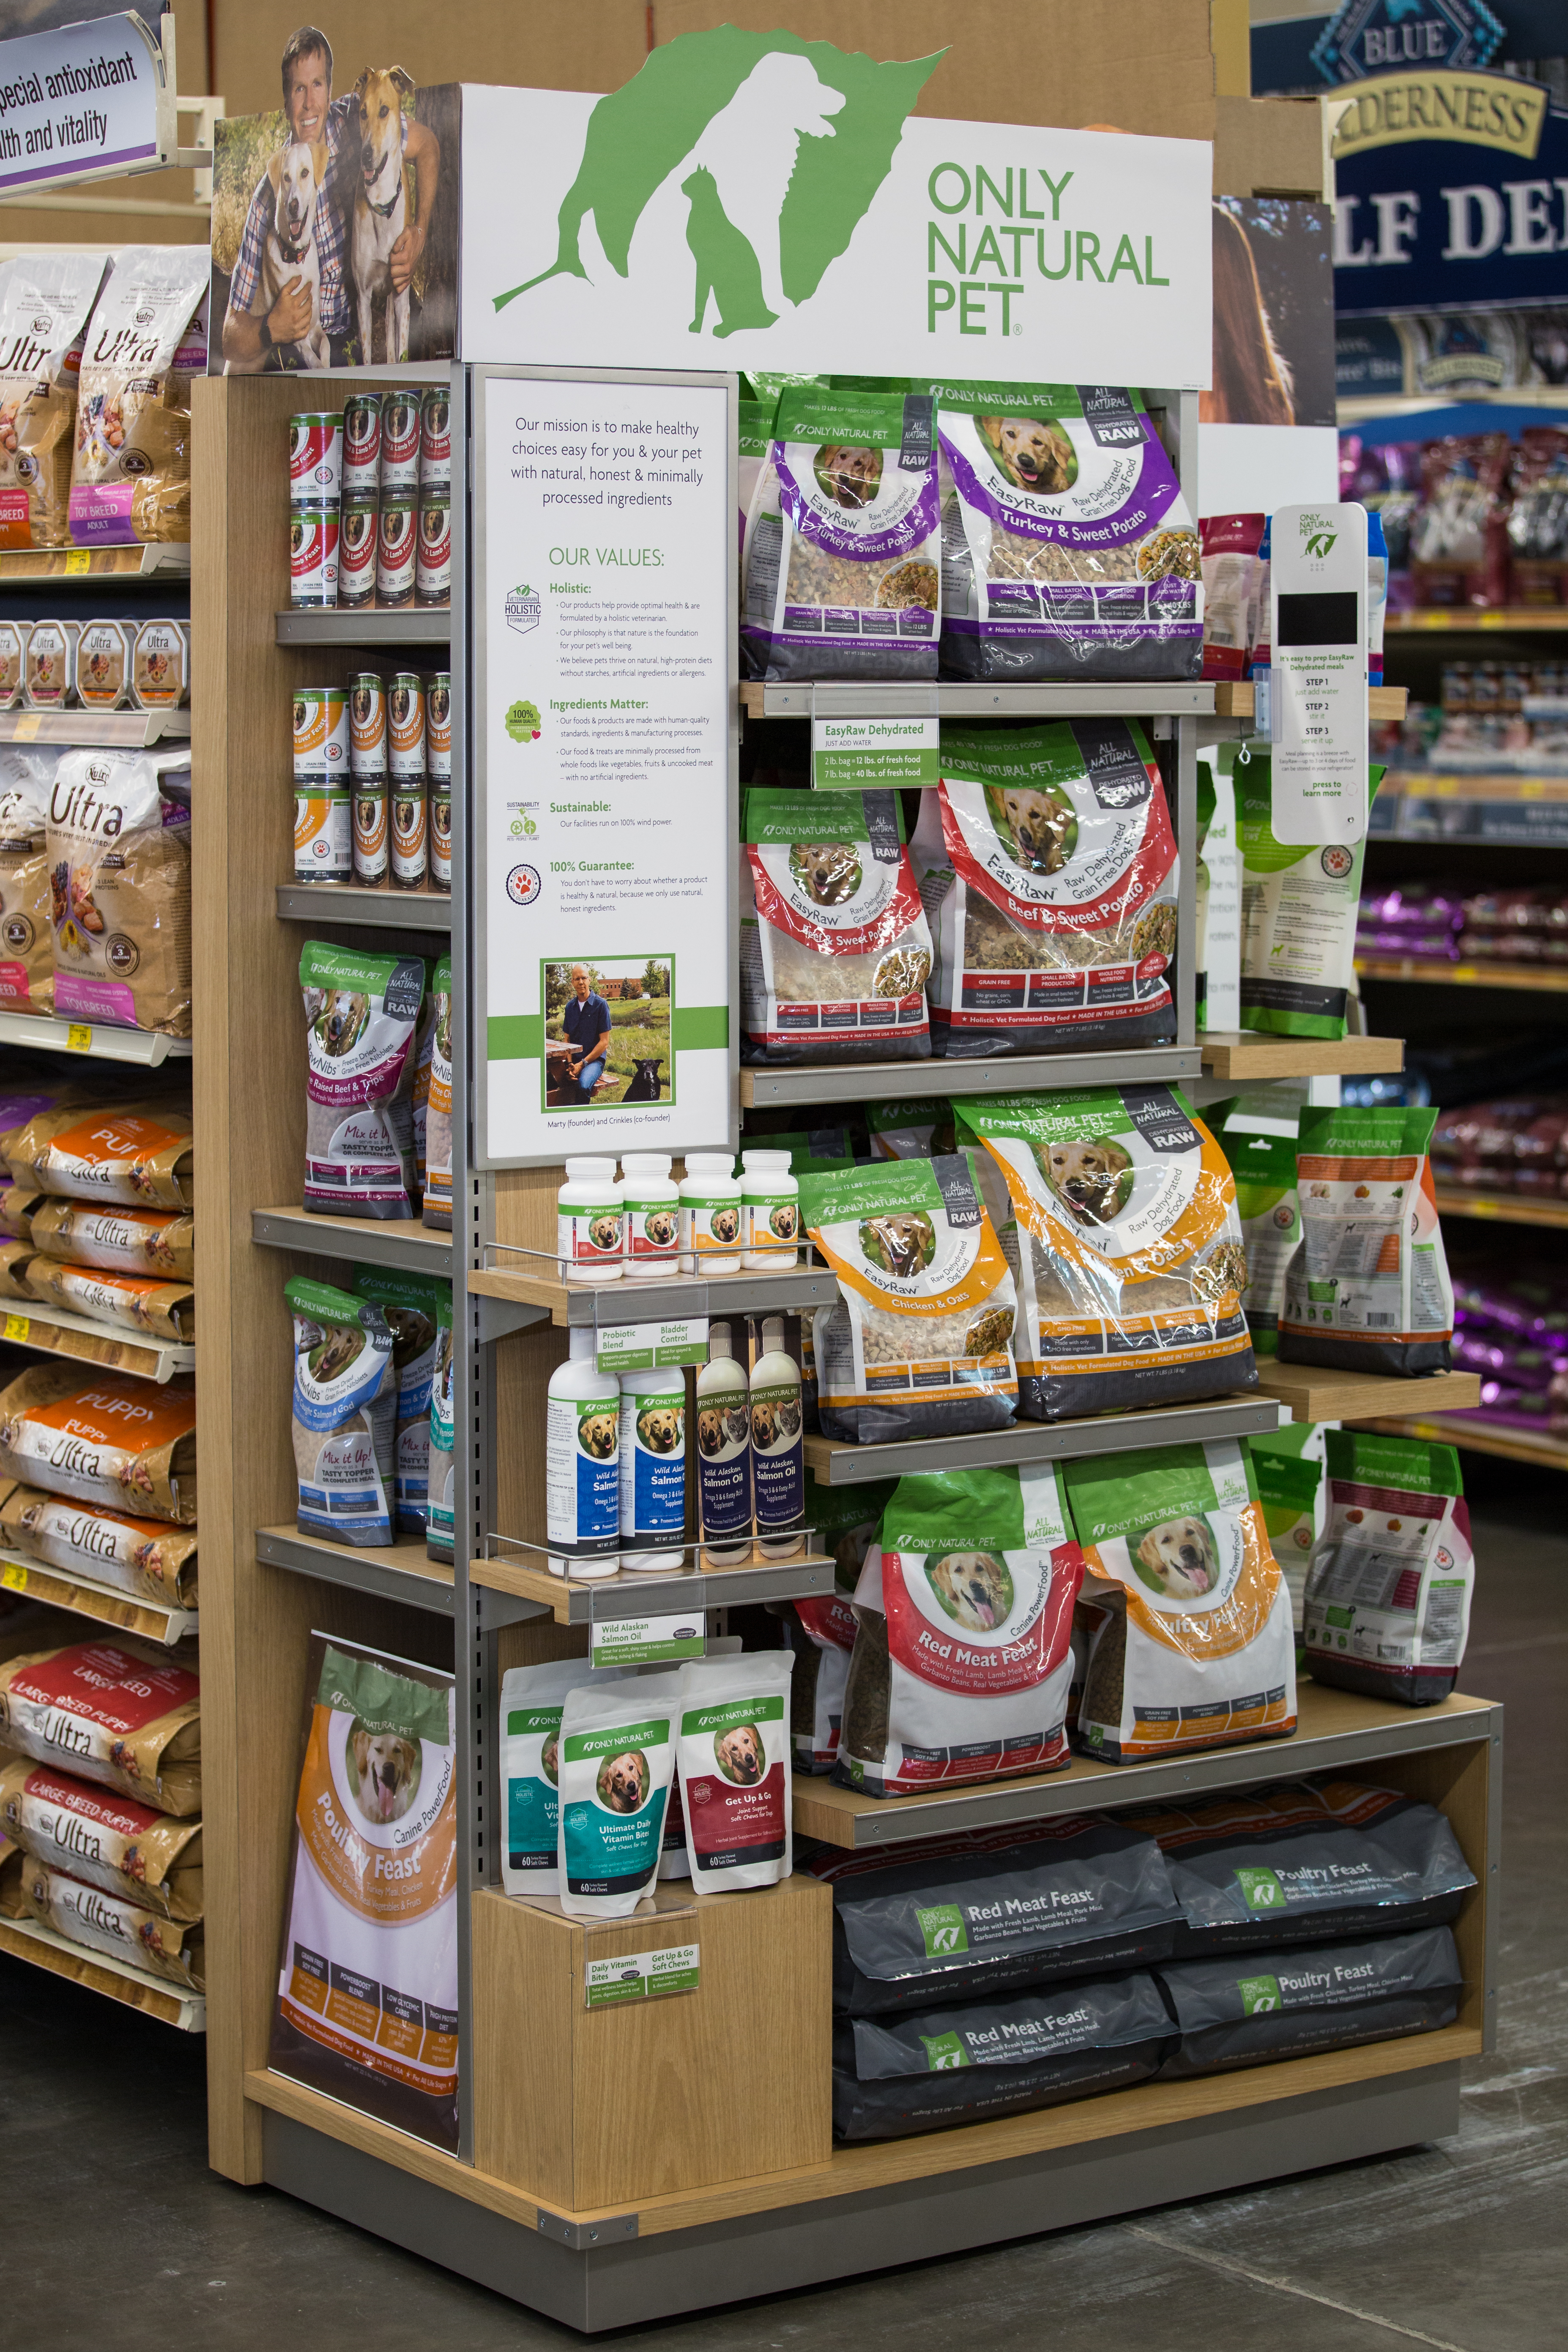 National Retailer of Only Natural Pet 